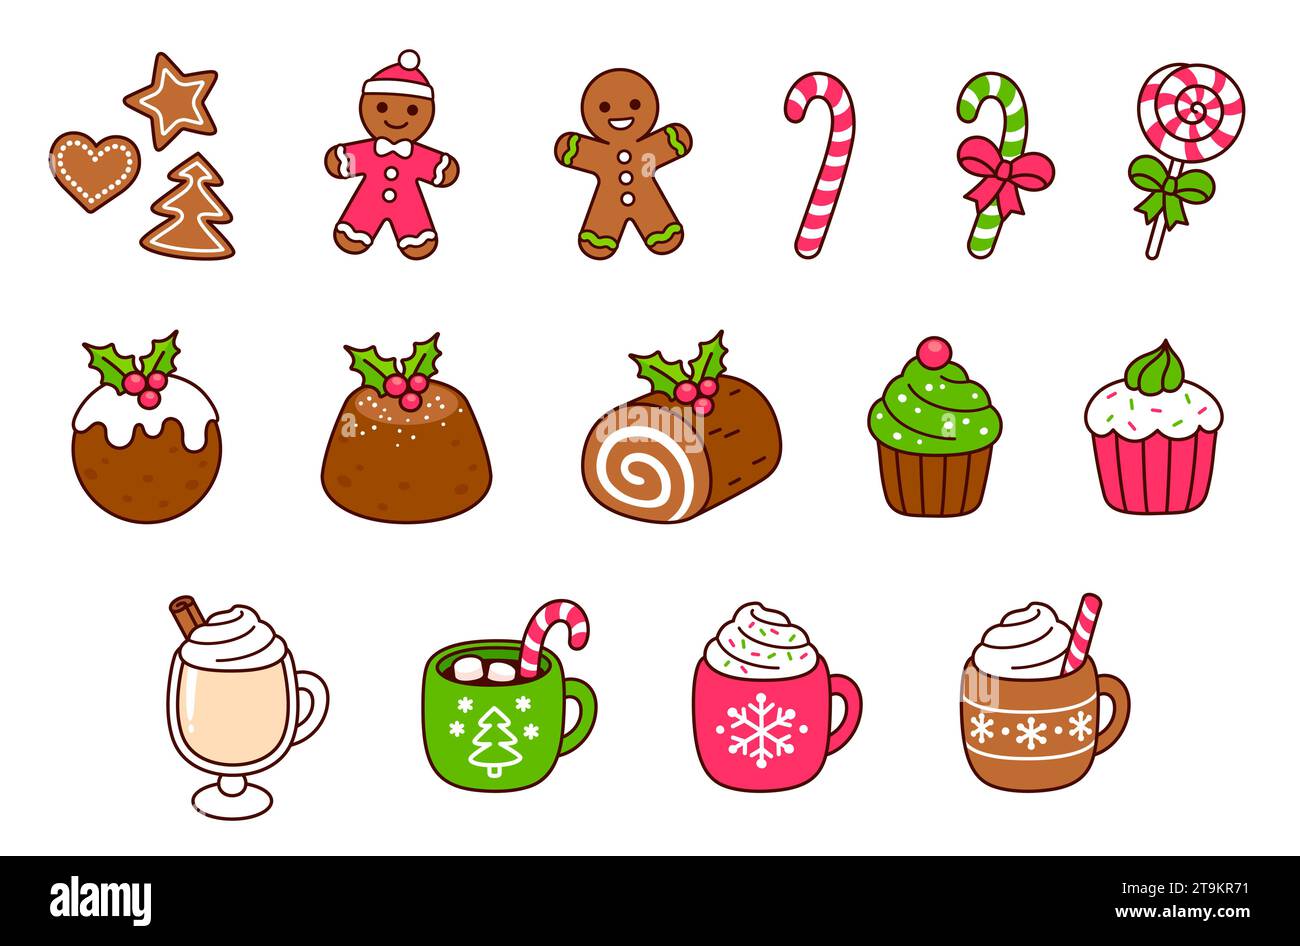 Traditional Christmas food: desserts, drinks, cookies and sweets. Kawaii hand drawn doodle icons. Cute cartoon vector illustration set. Stock Vector